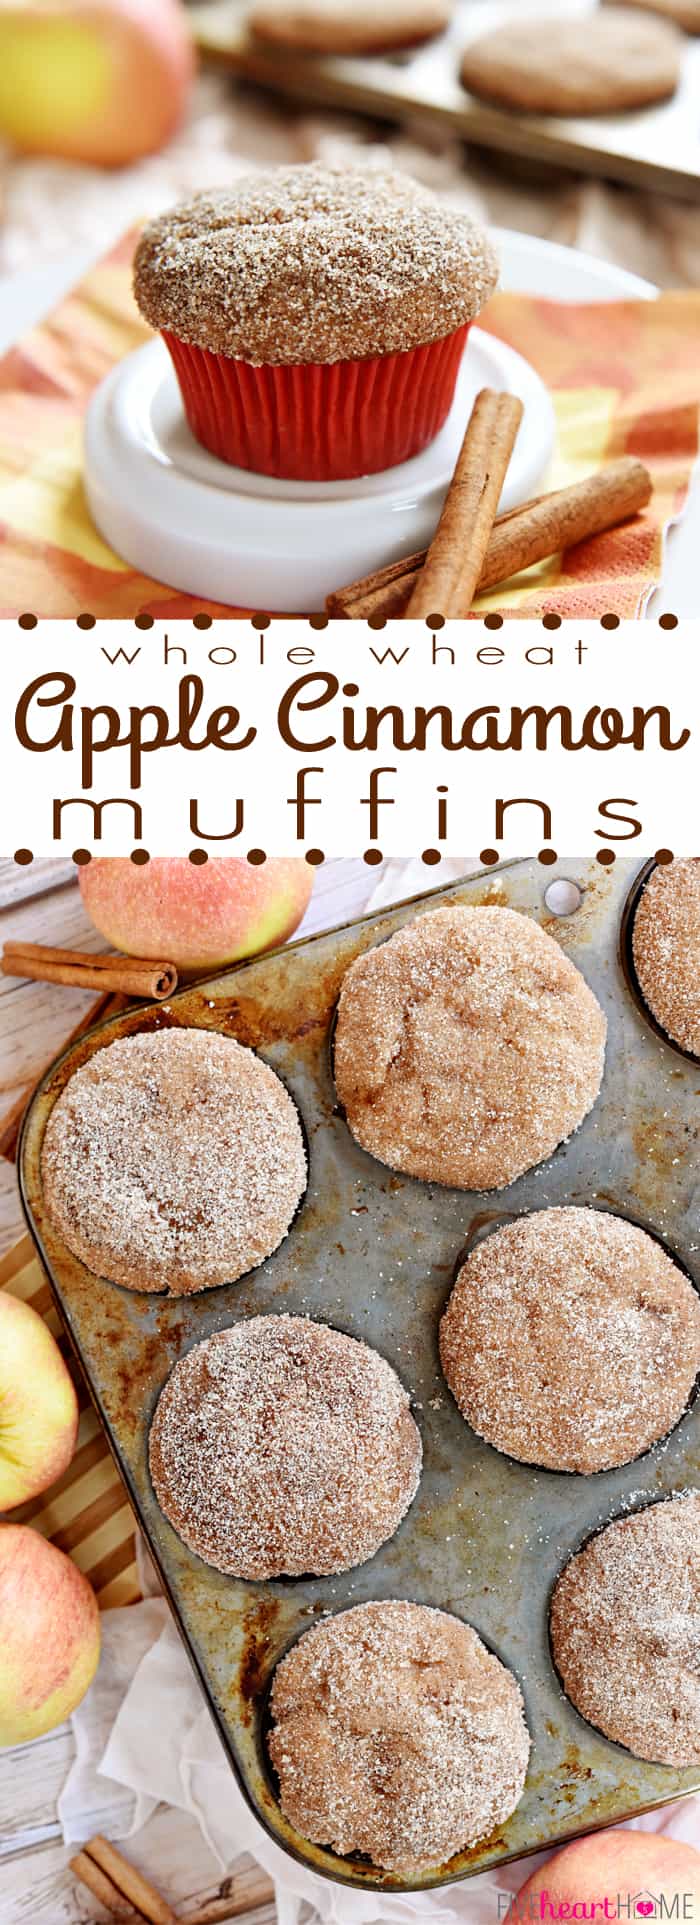 Whole Wheat Apple Cinnamon Muffins are soft and moist, bursting with tender apples, made wholesome by whole wheat flour and coconut oil, and topped with a cinnamon sugar coating | FiveHeartHome.com via @fivehearthome